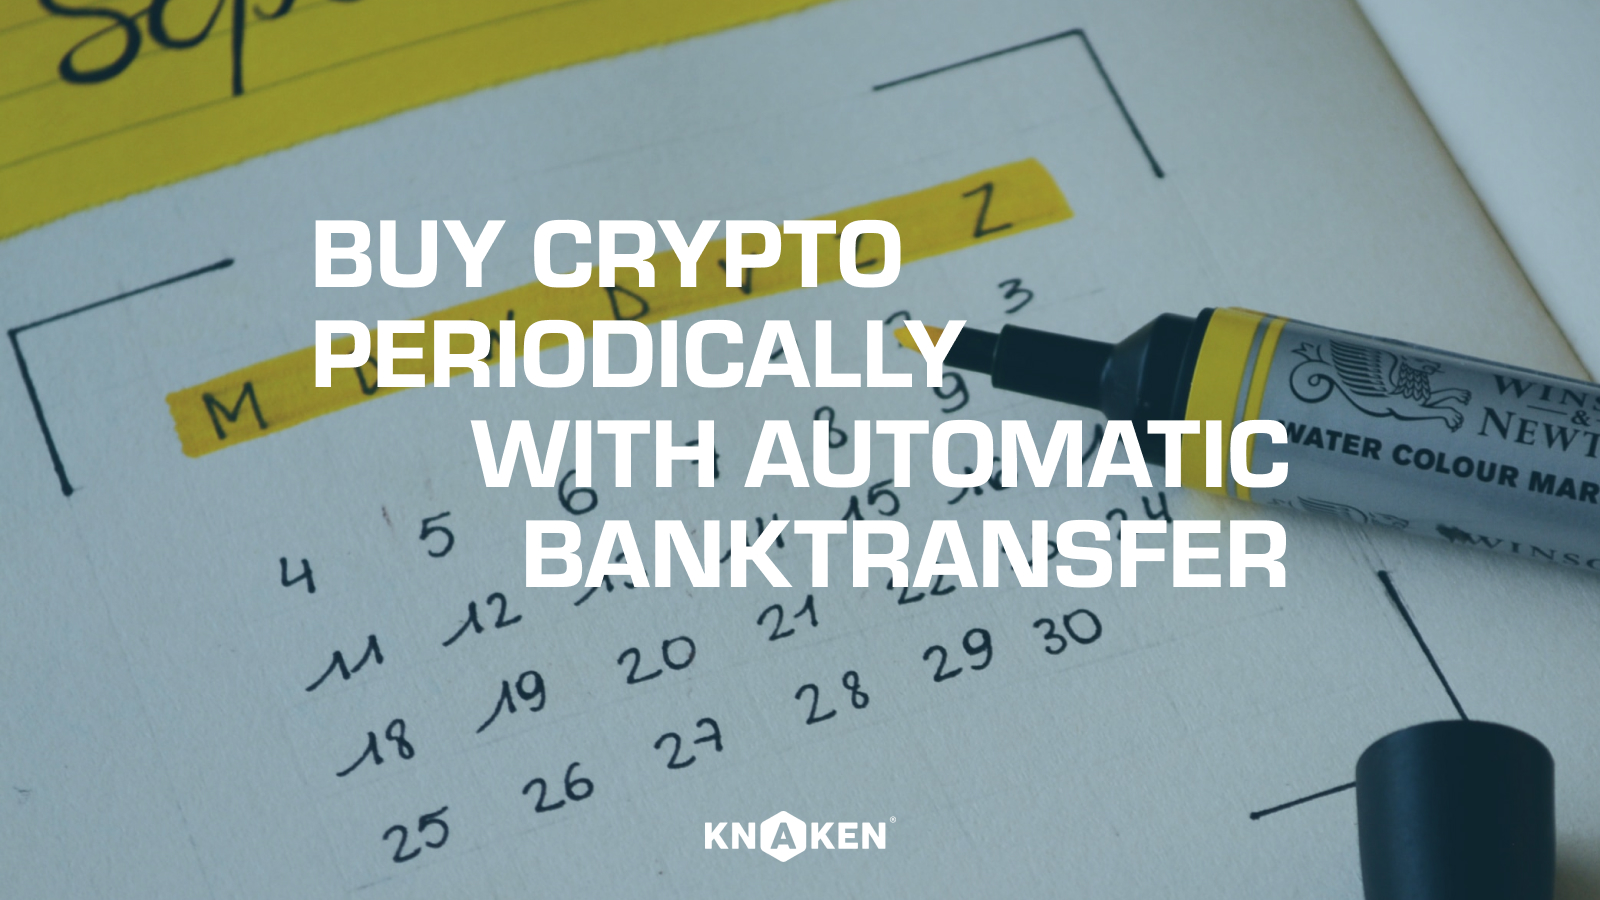 Buy crypto periodically, with an automatic banktransfer (DCA)